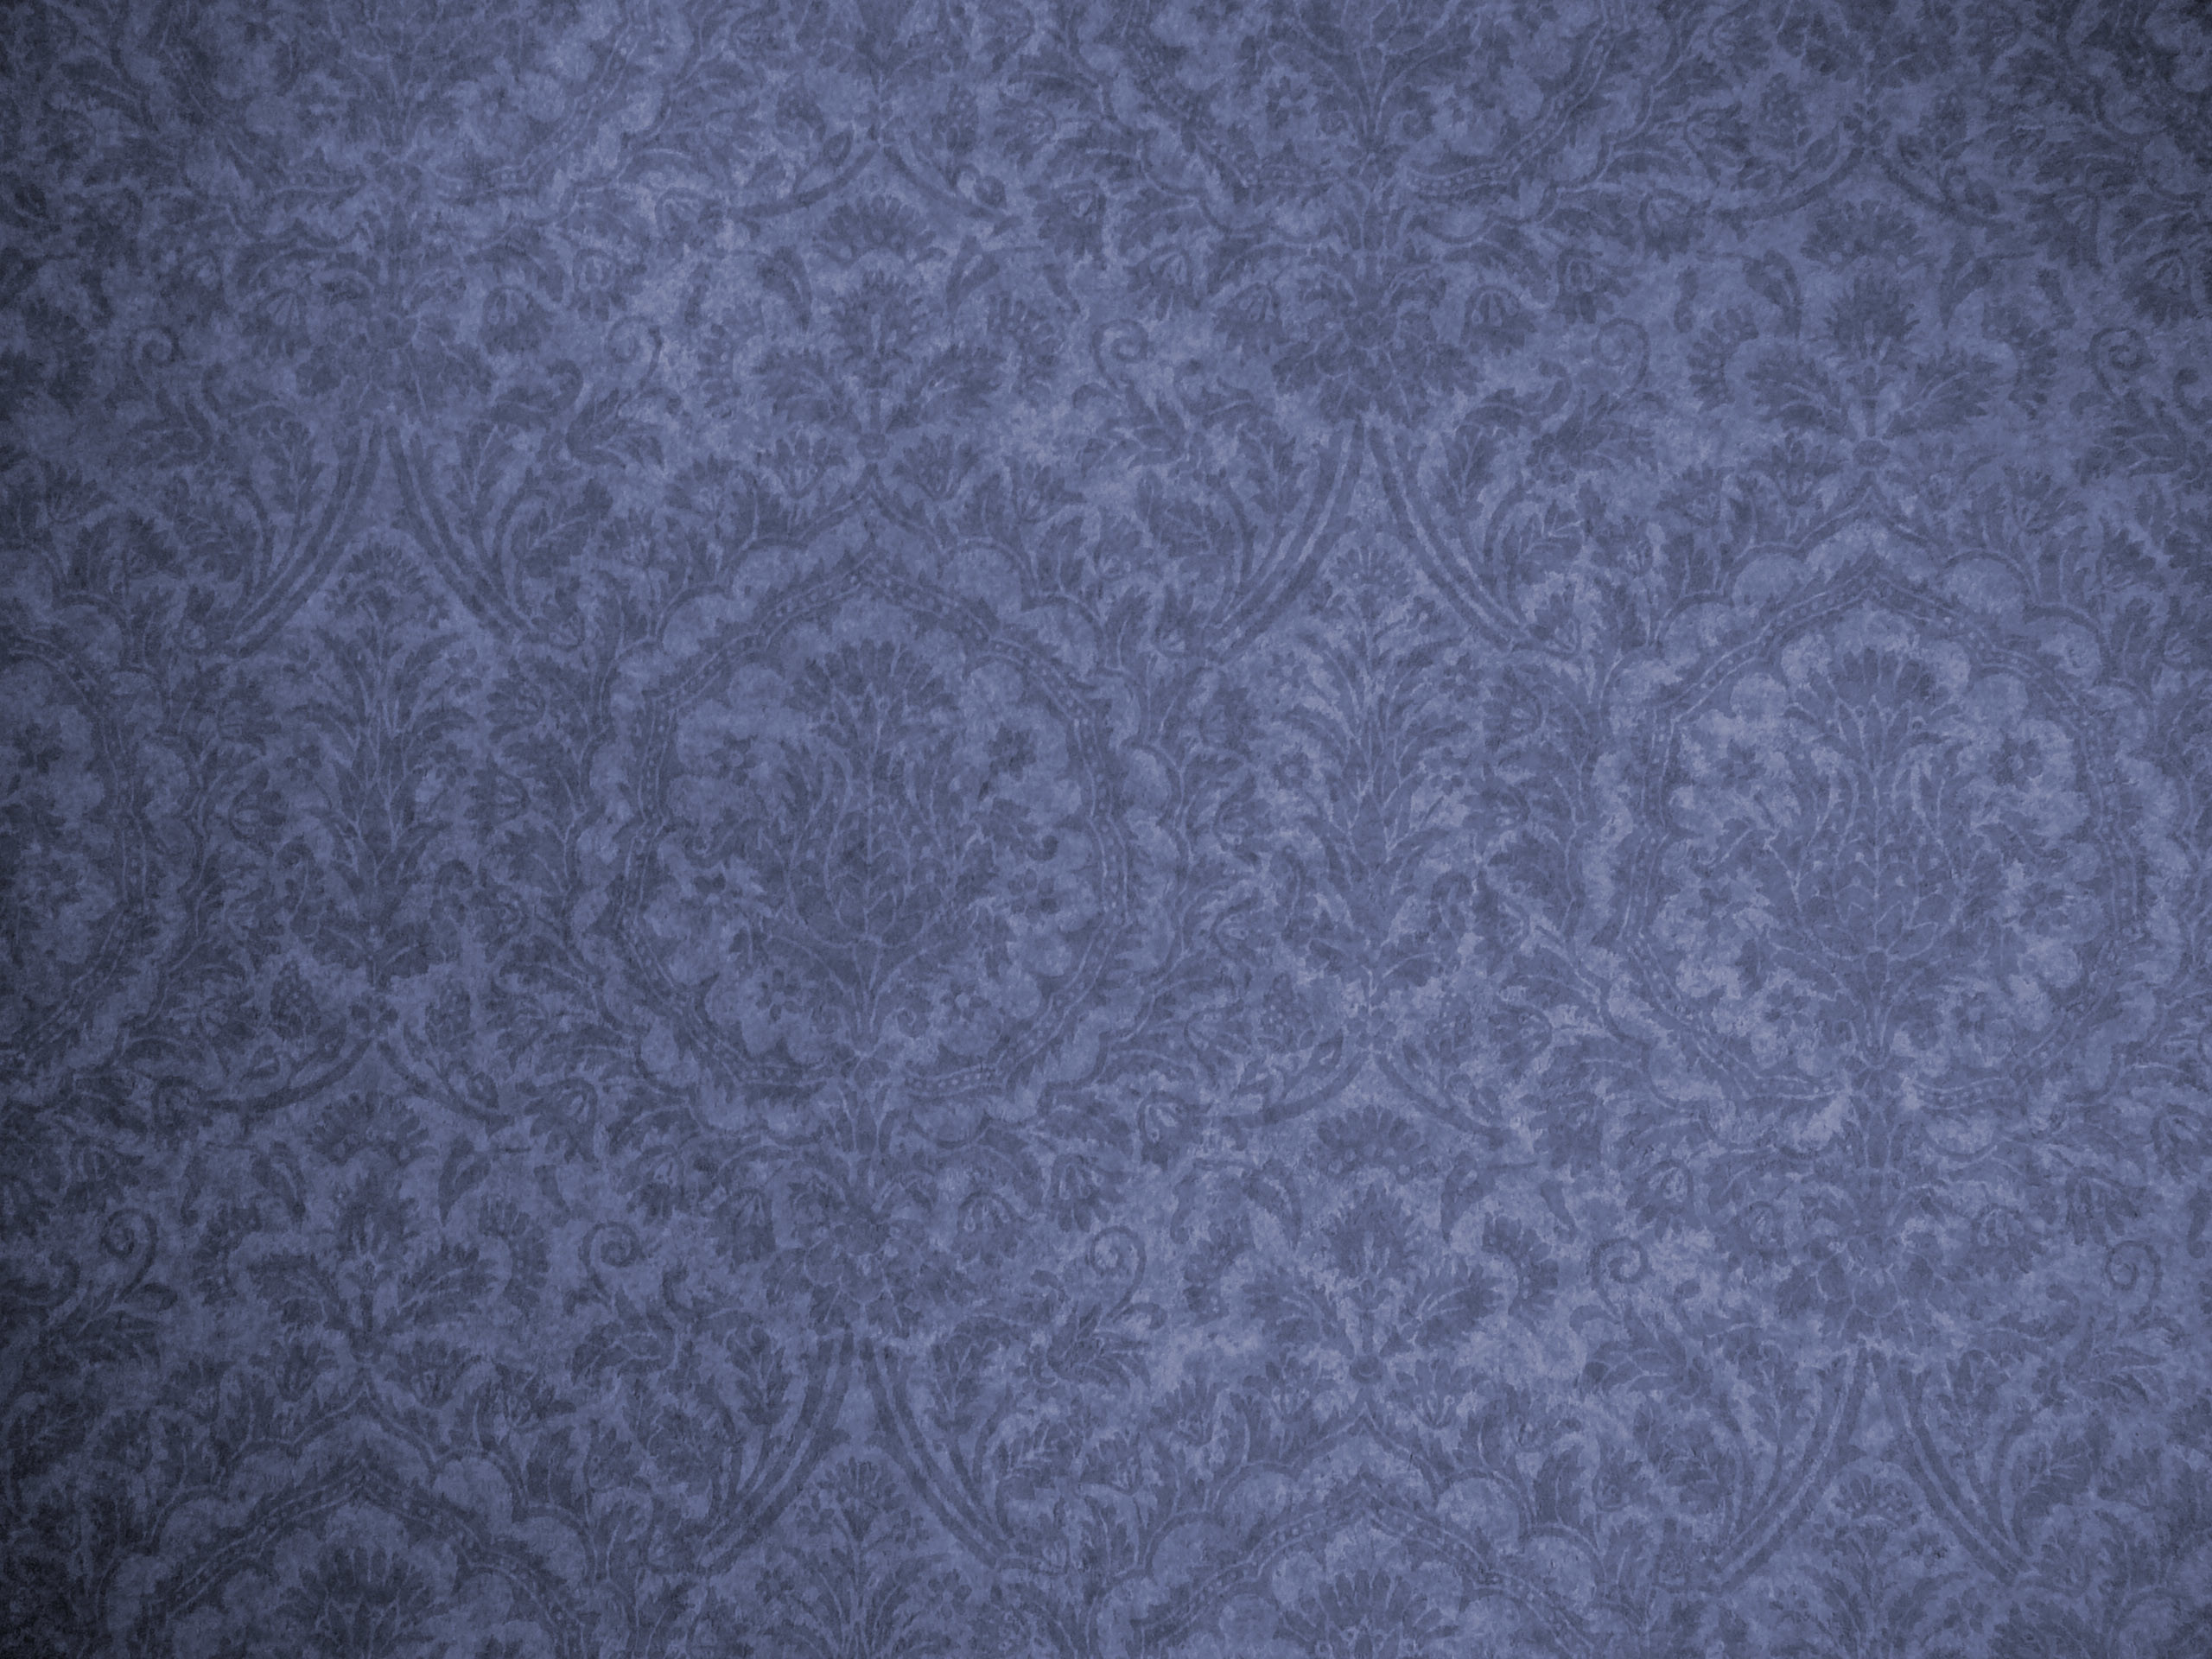 2560x1920 Old Wallpaper Patterns | Patterns Gallery